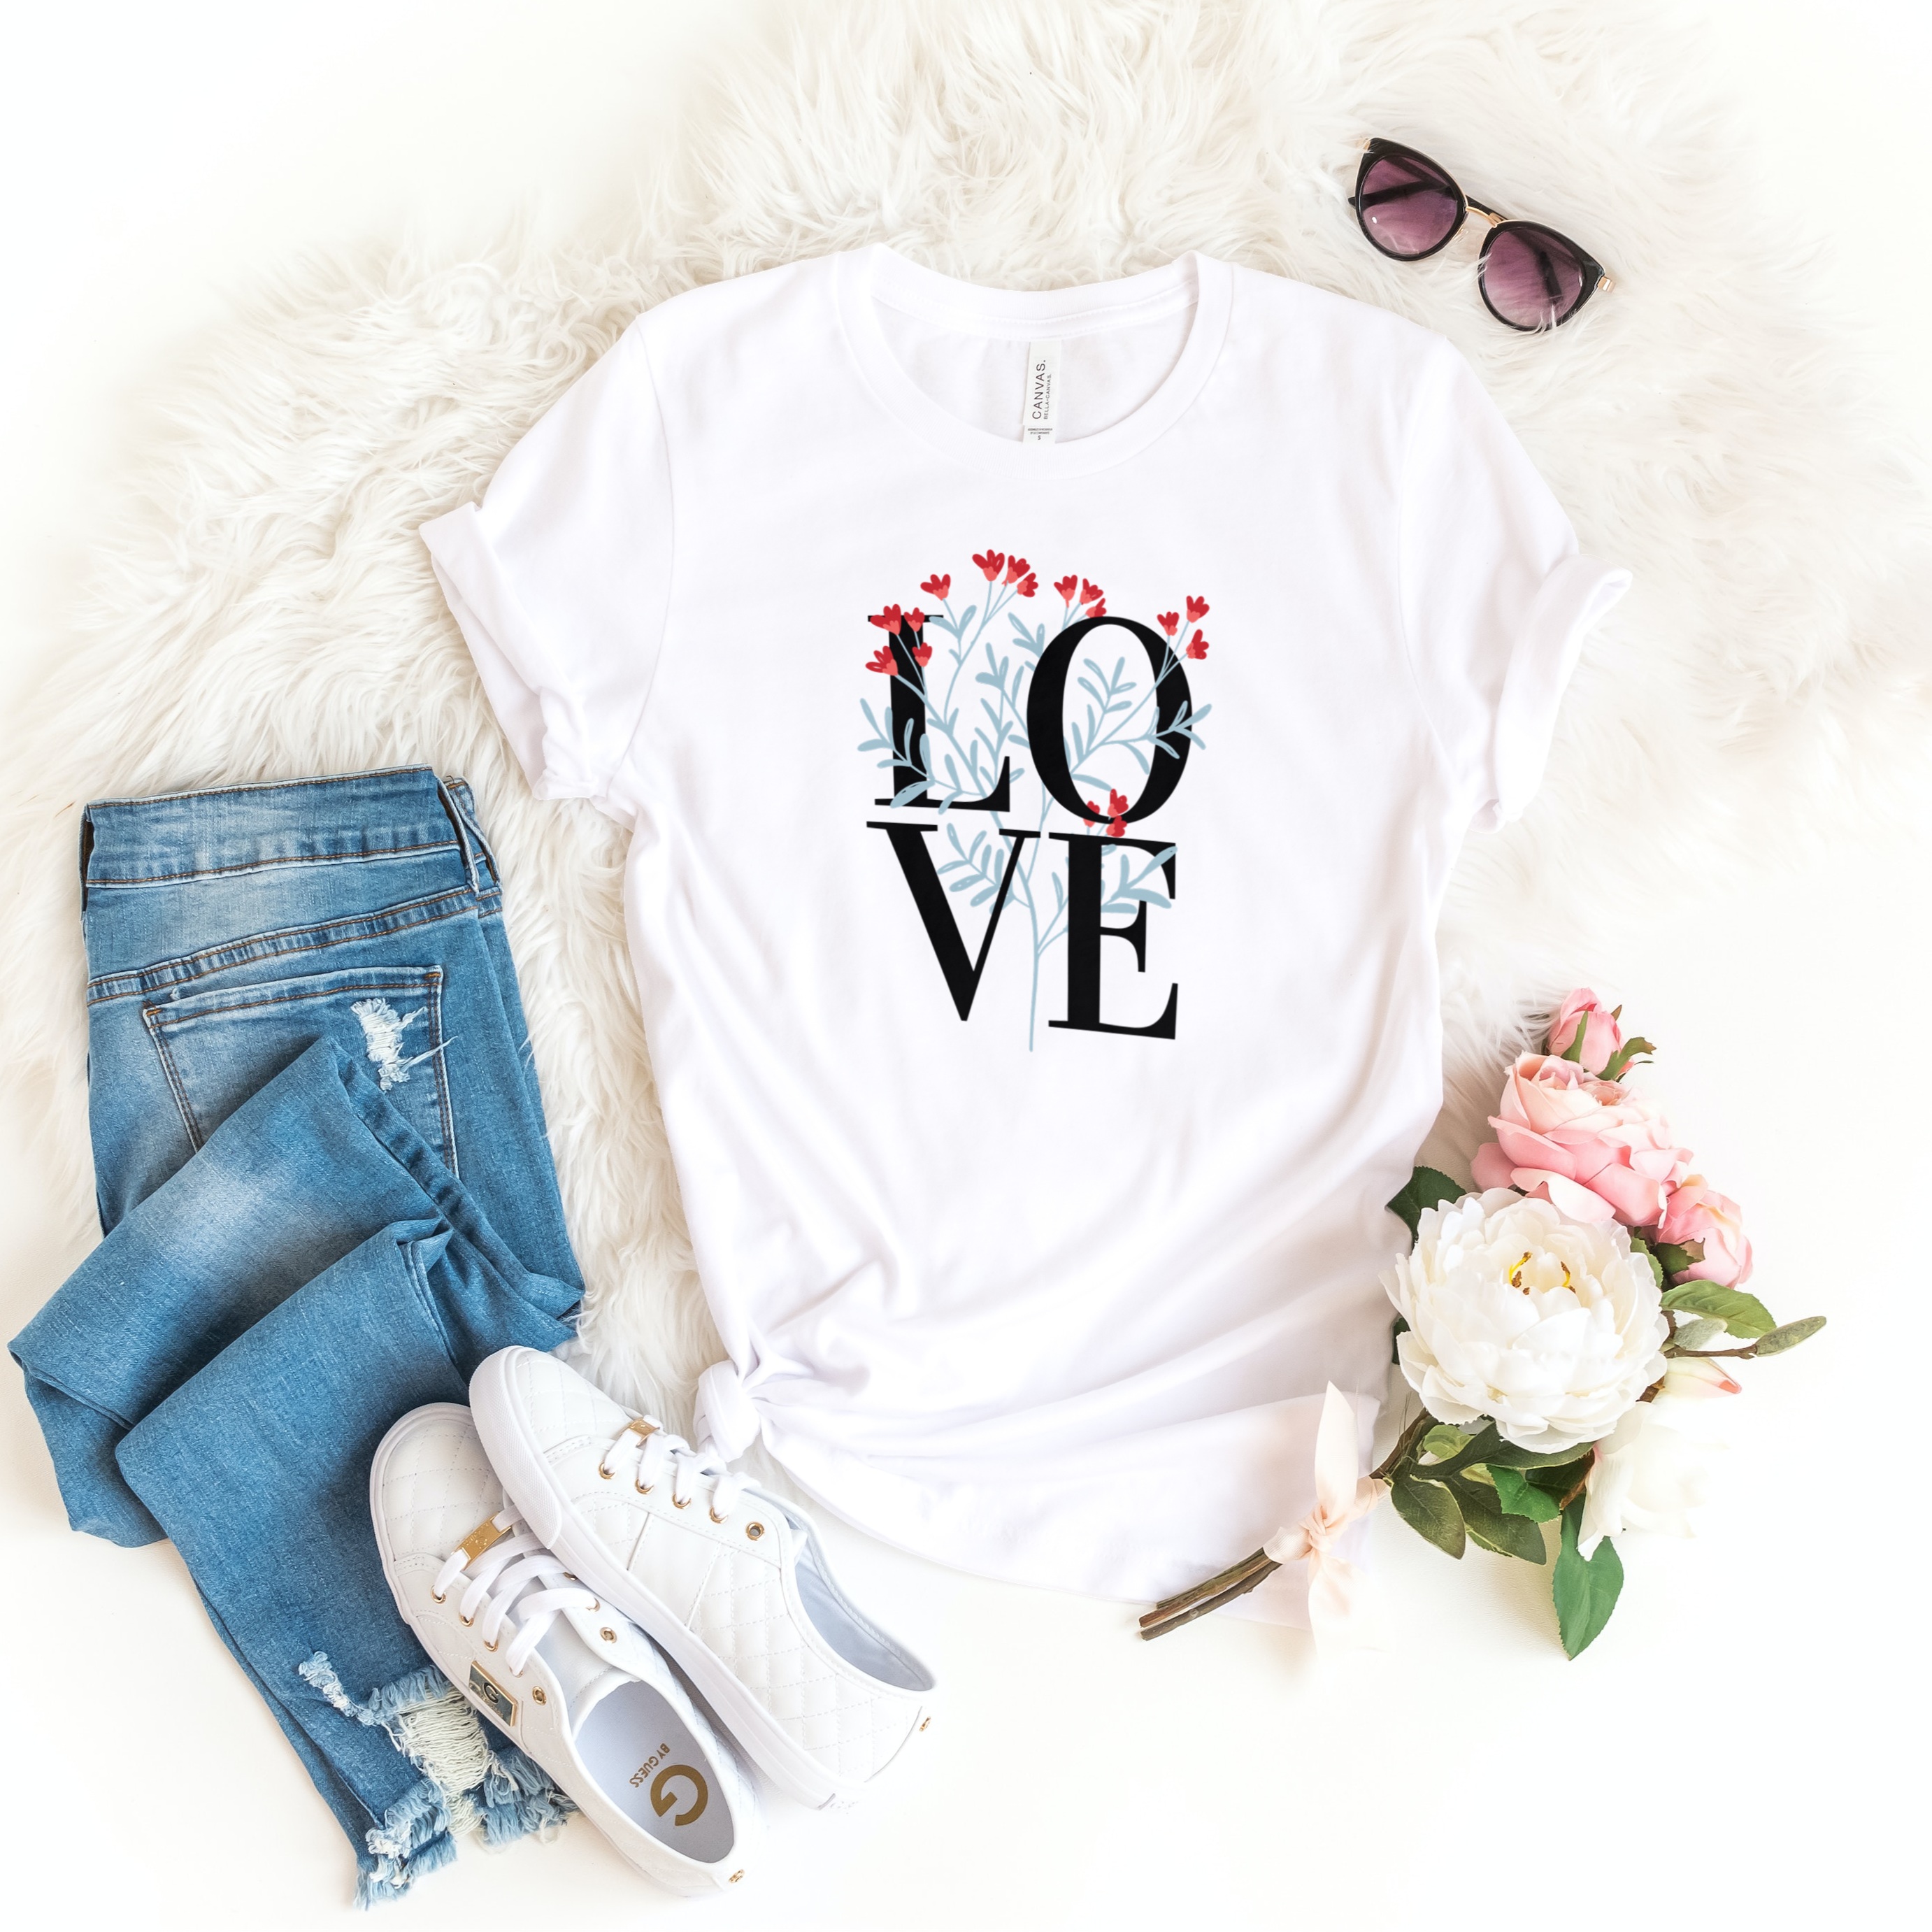 Story of Awakening Lifestyle Community Spirituality Relationships Love Light Meditation Oneness Earth Balance Healing Shop Store Charity Tree Nature Read Write T shirt Tops Tees Clothing Women Horoscope Valentines Day Quote Sustainable Organic Cotton